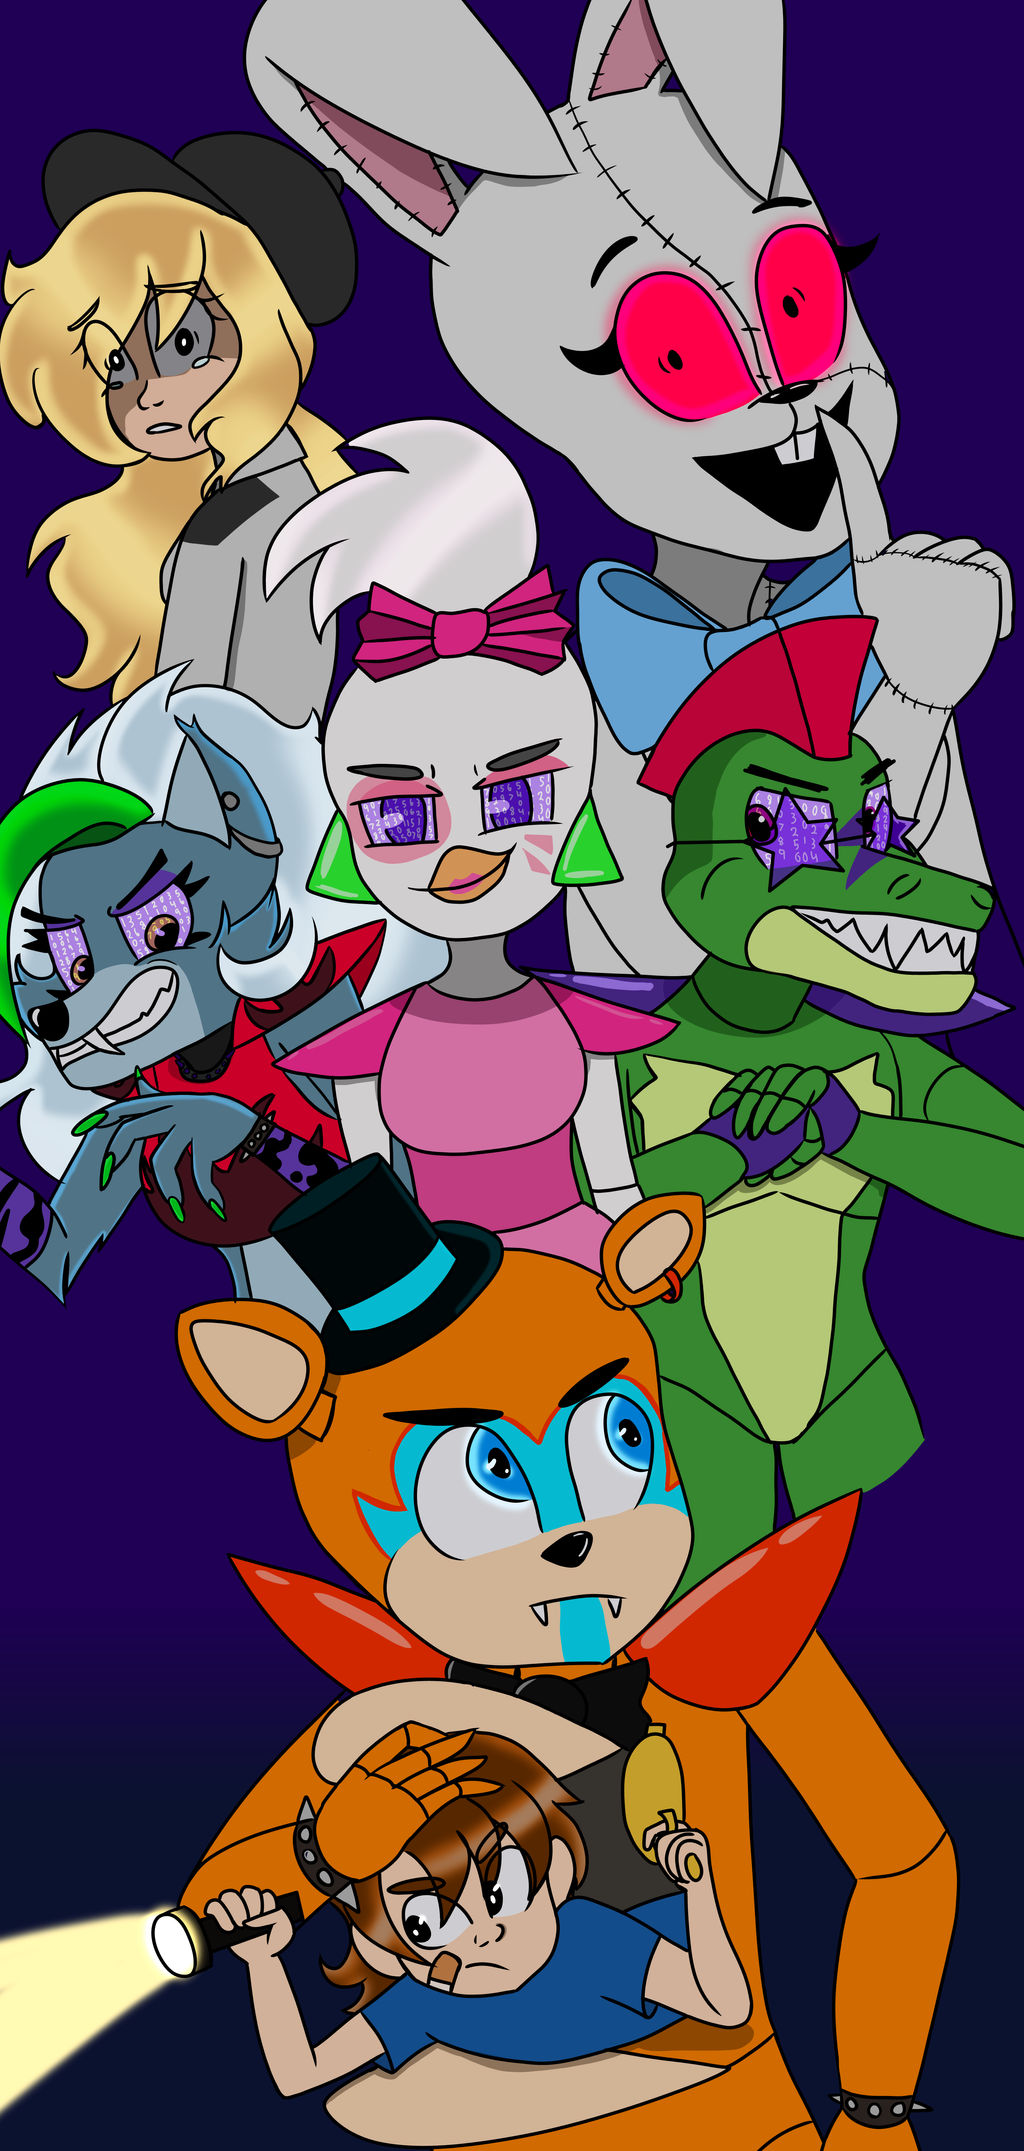 FNAF Security Breach characters by fnafmangl on DeviantArt